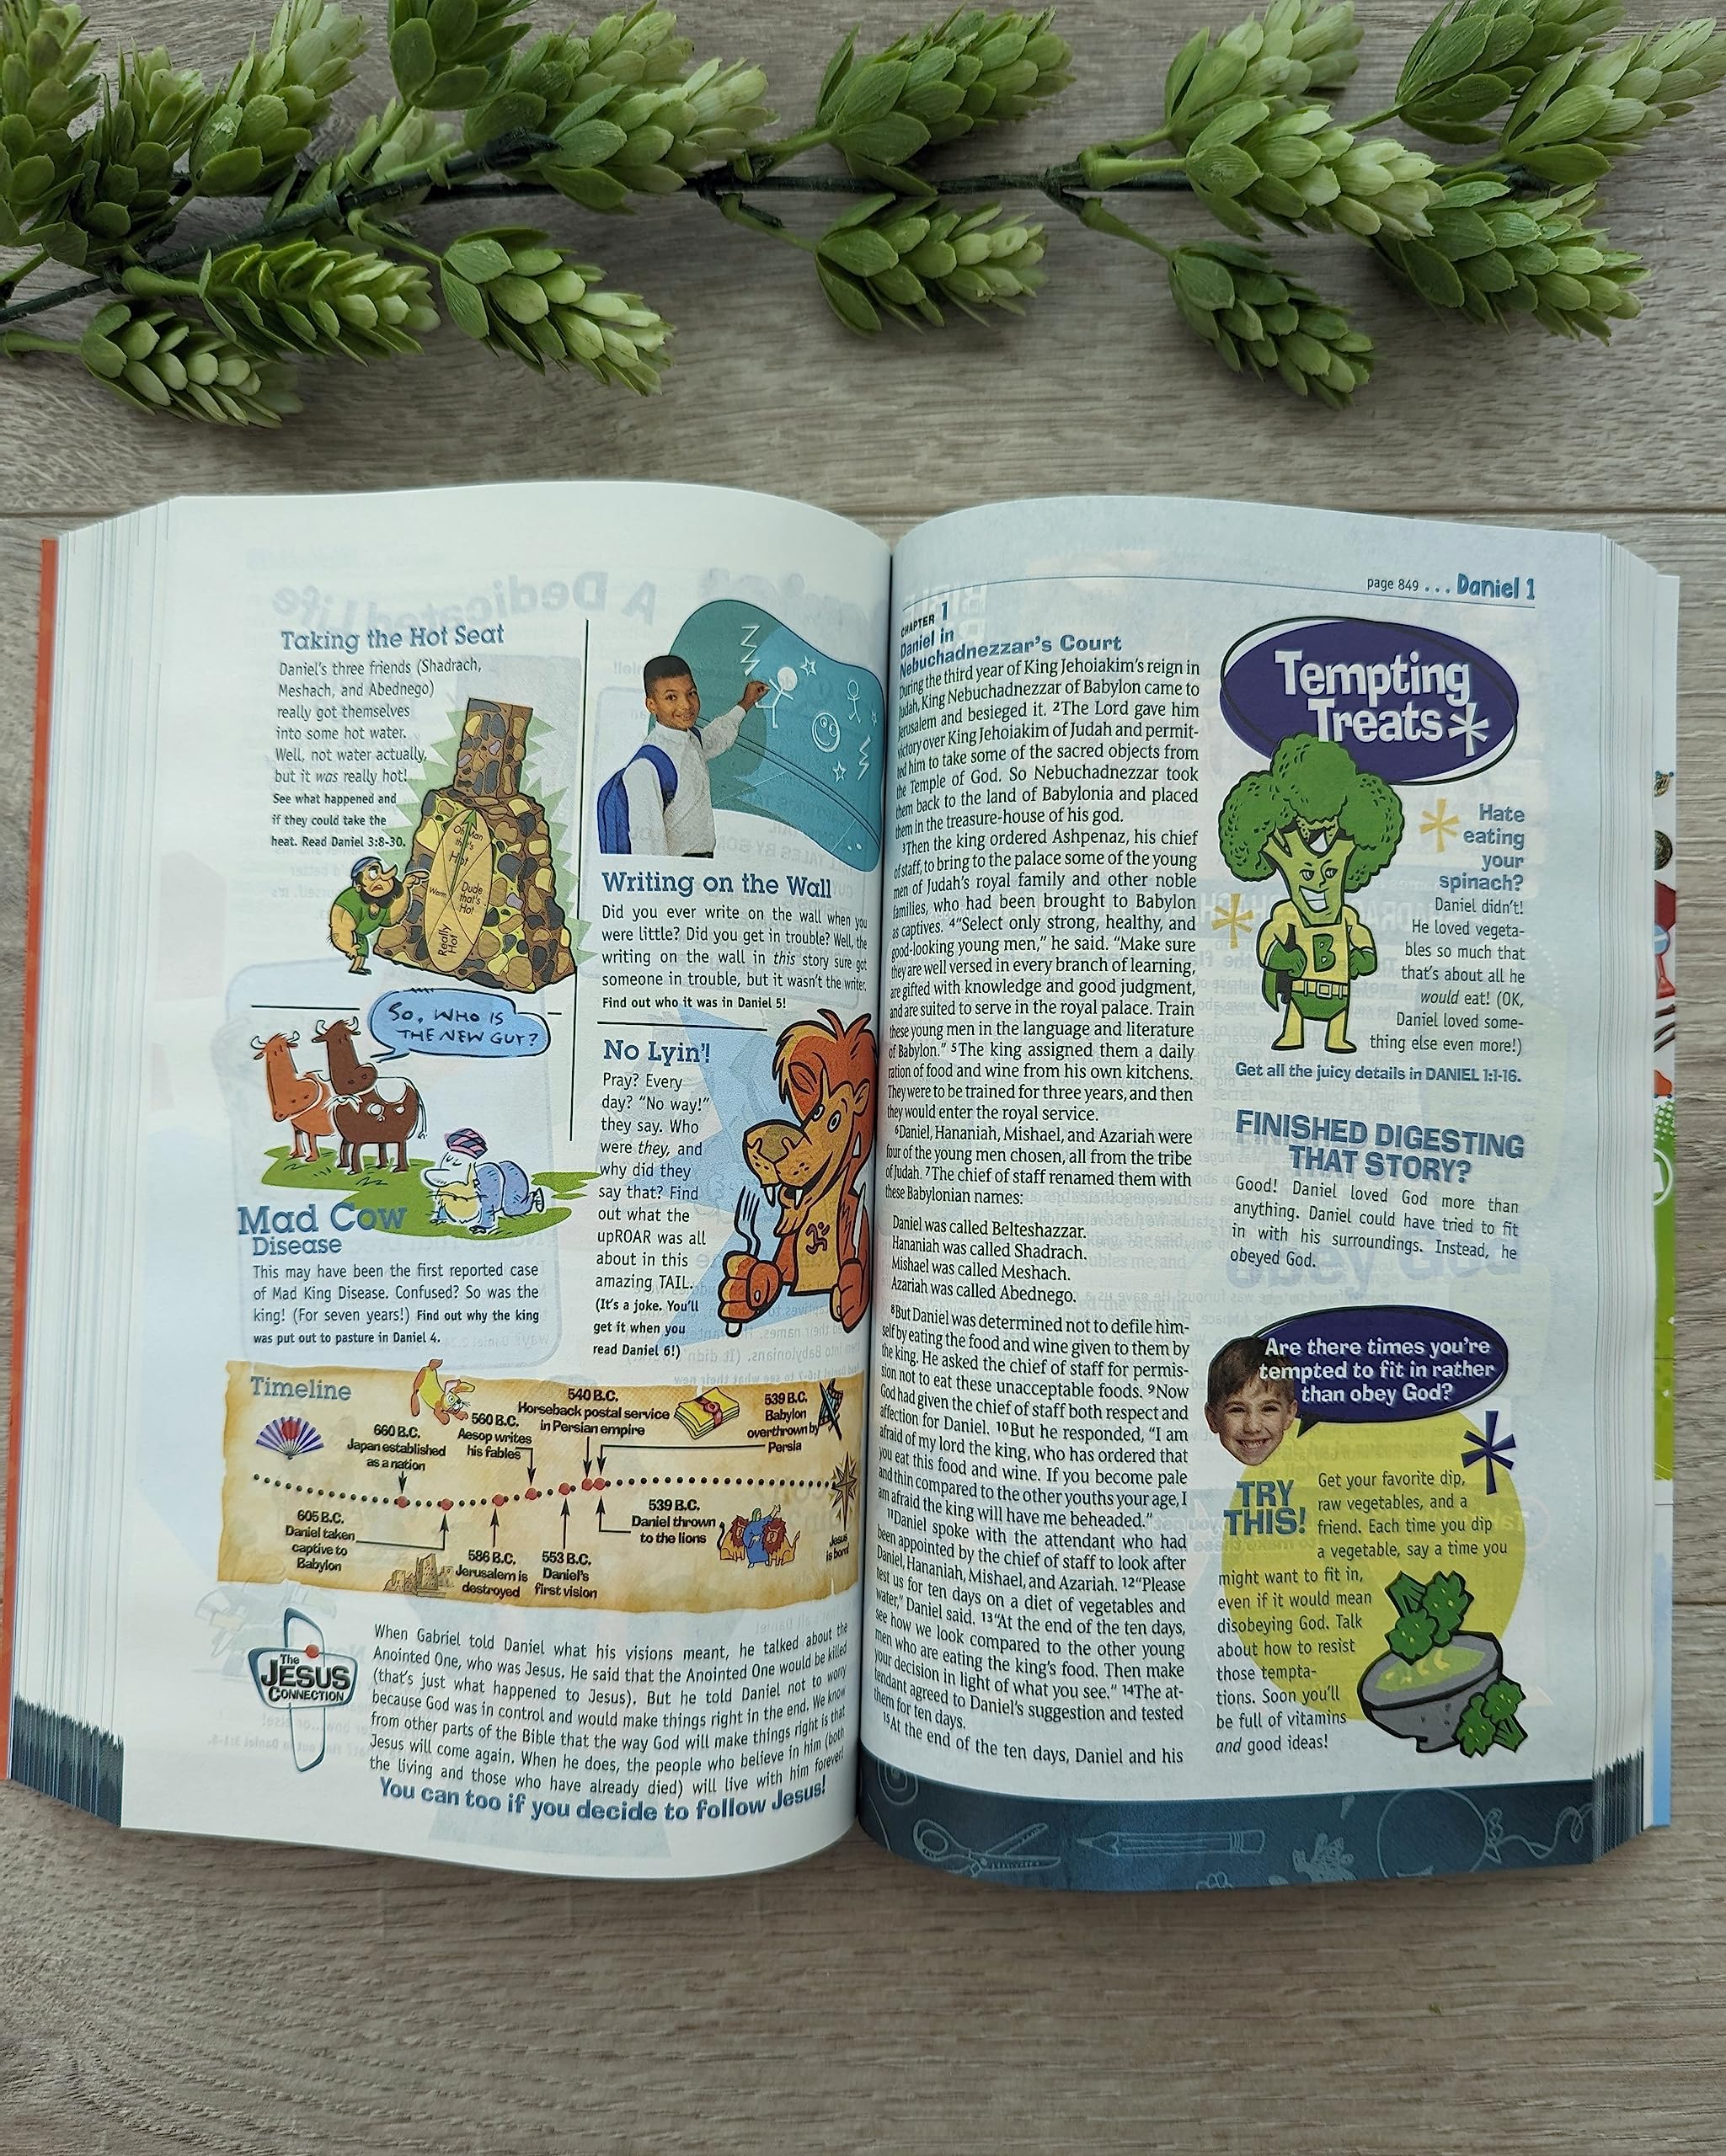 NLT Hands-On Bible for Kids, 3rd Edition (Softcover): Full-Color, Family Activities, Amazing Facts, Charts, and Maps